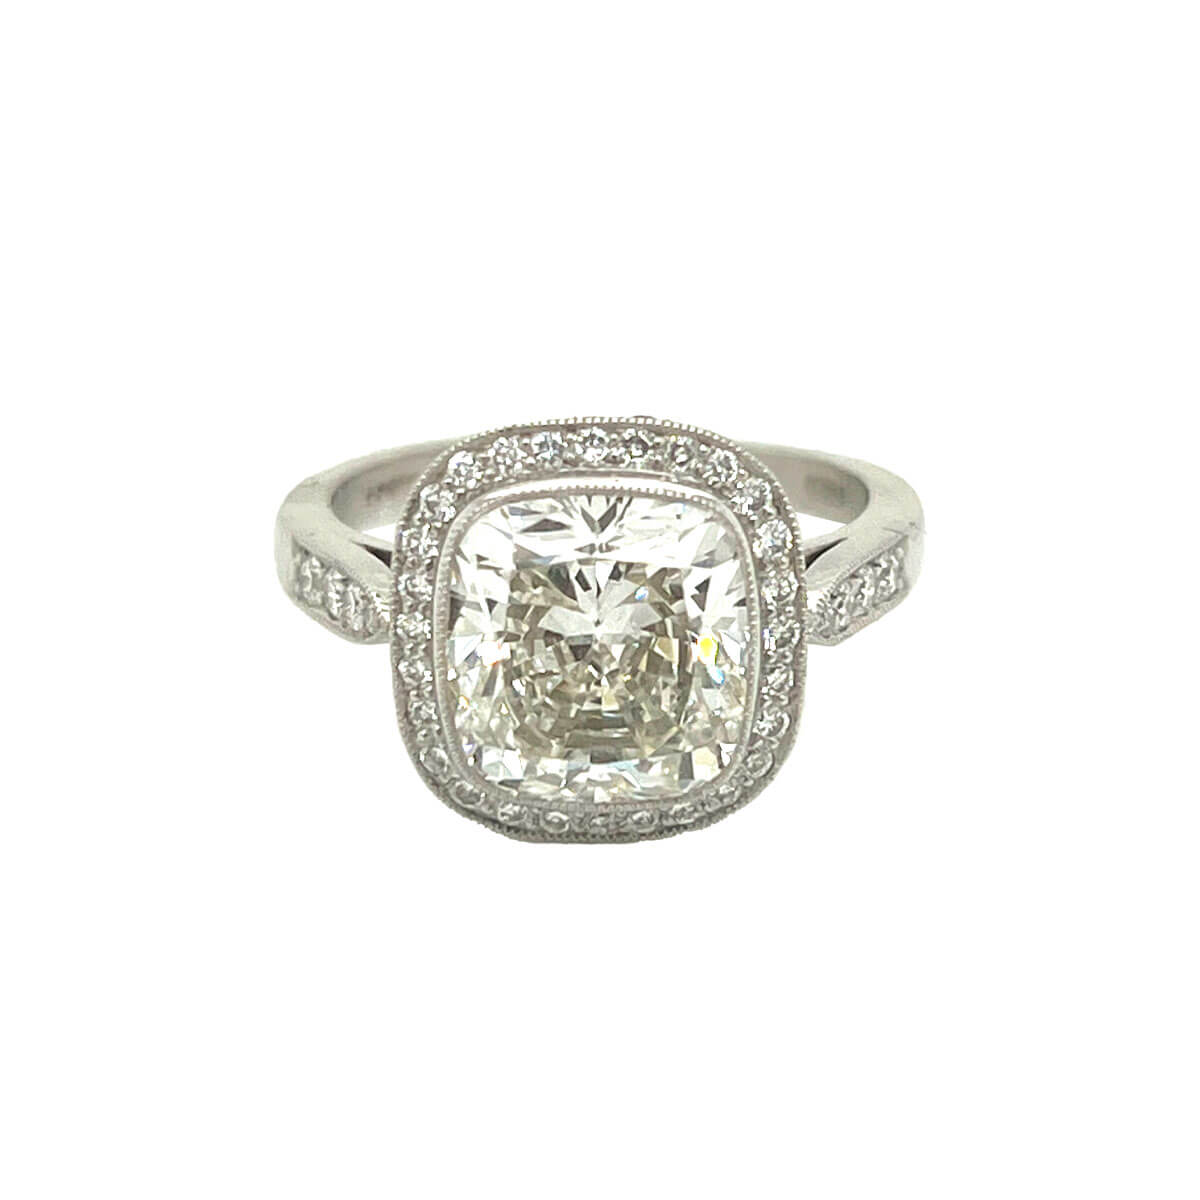 4.02ct Cushion Cut Diamond Halo Cluster Ring | Cry For The Moon